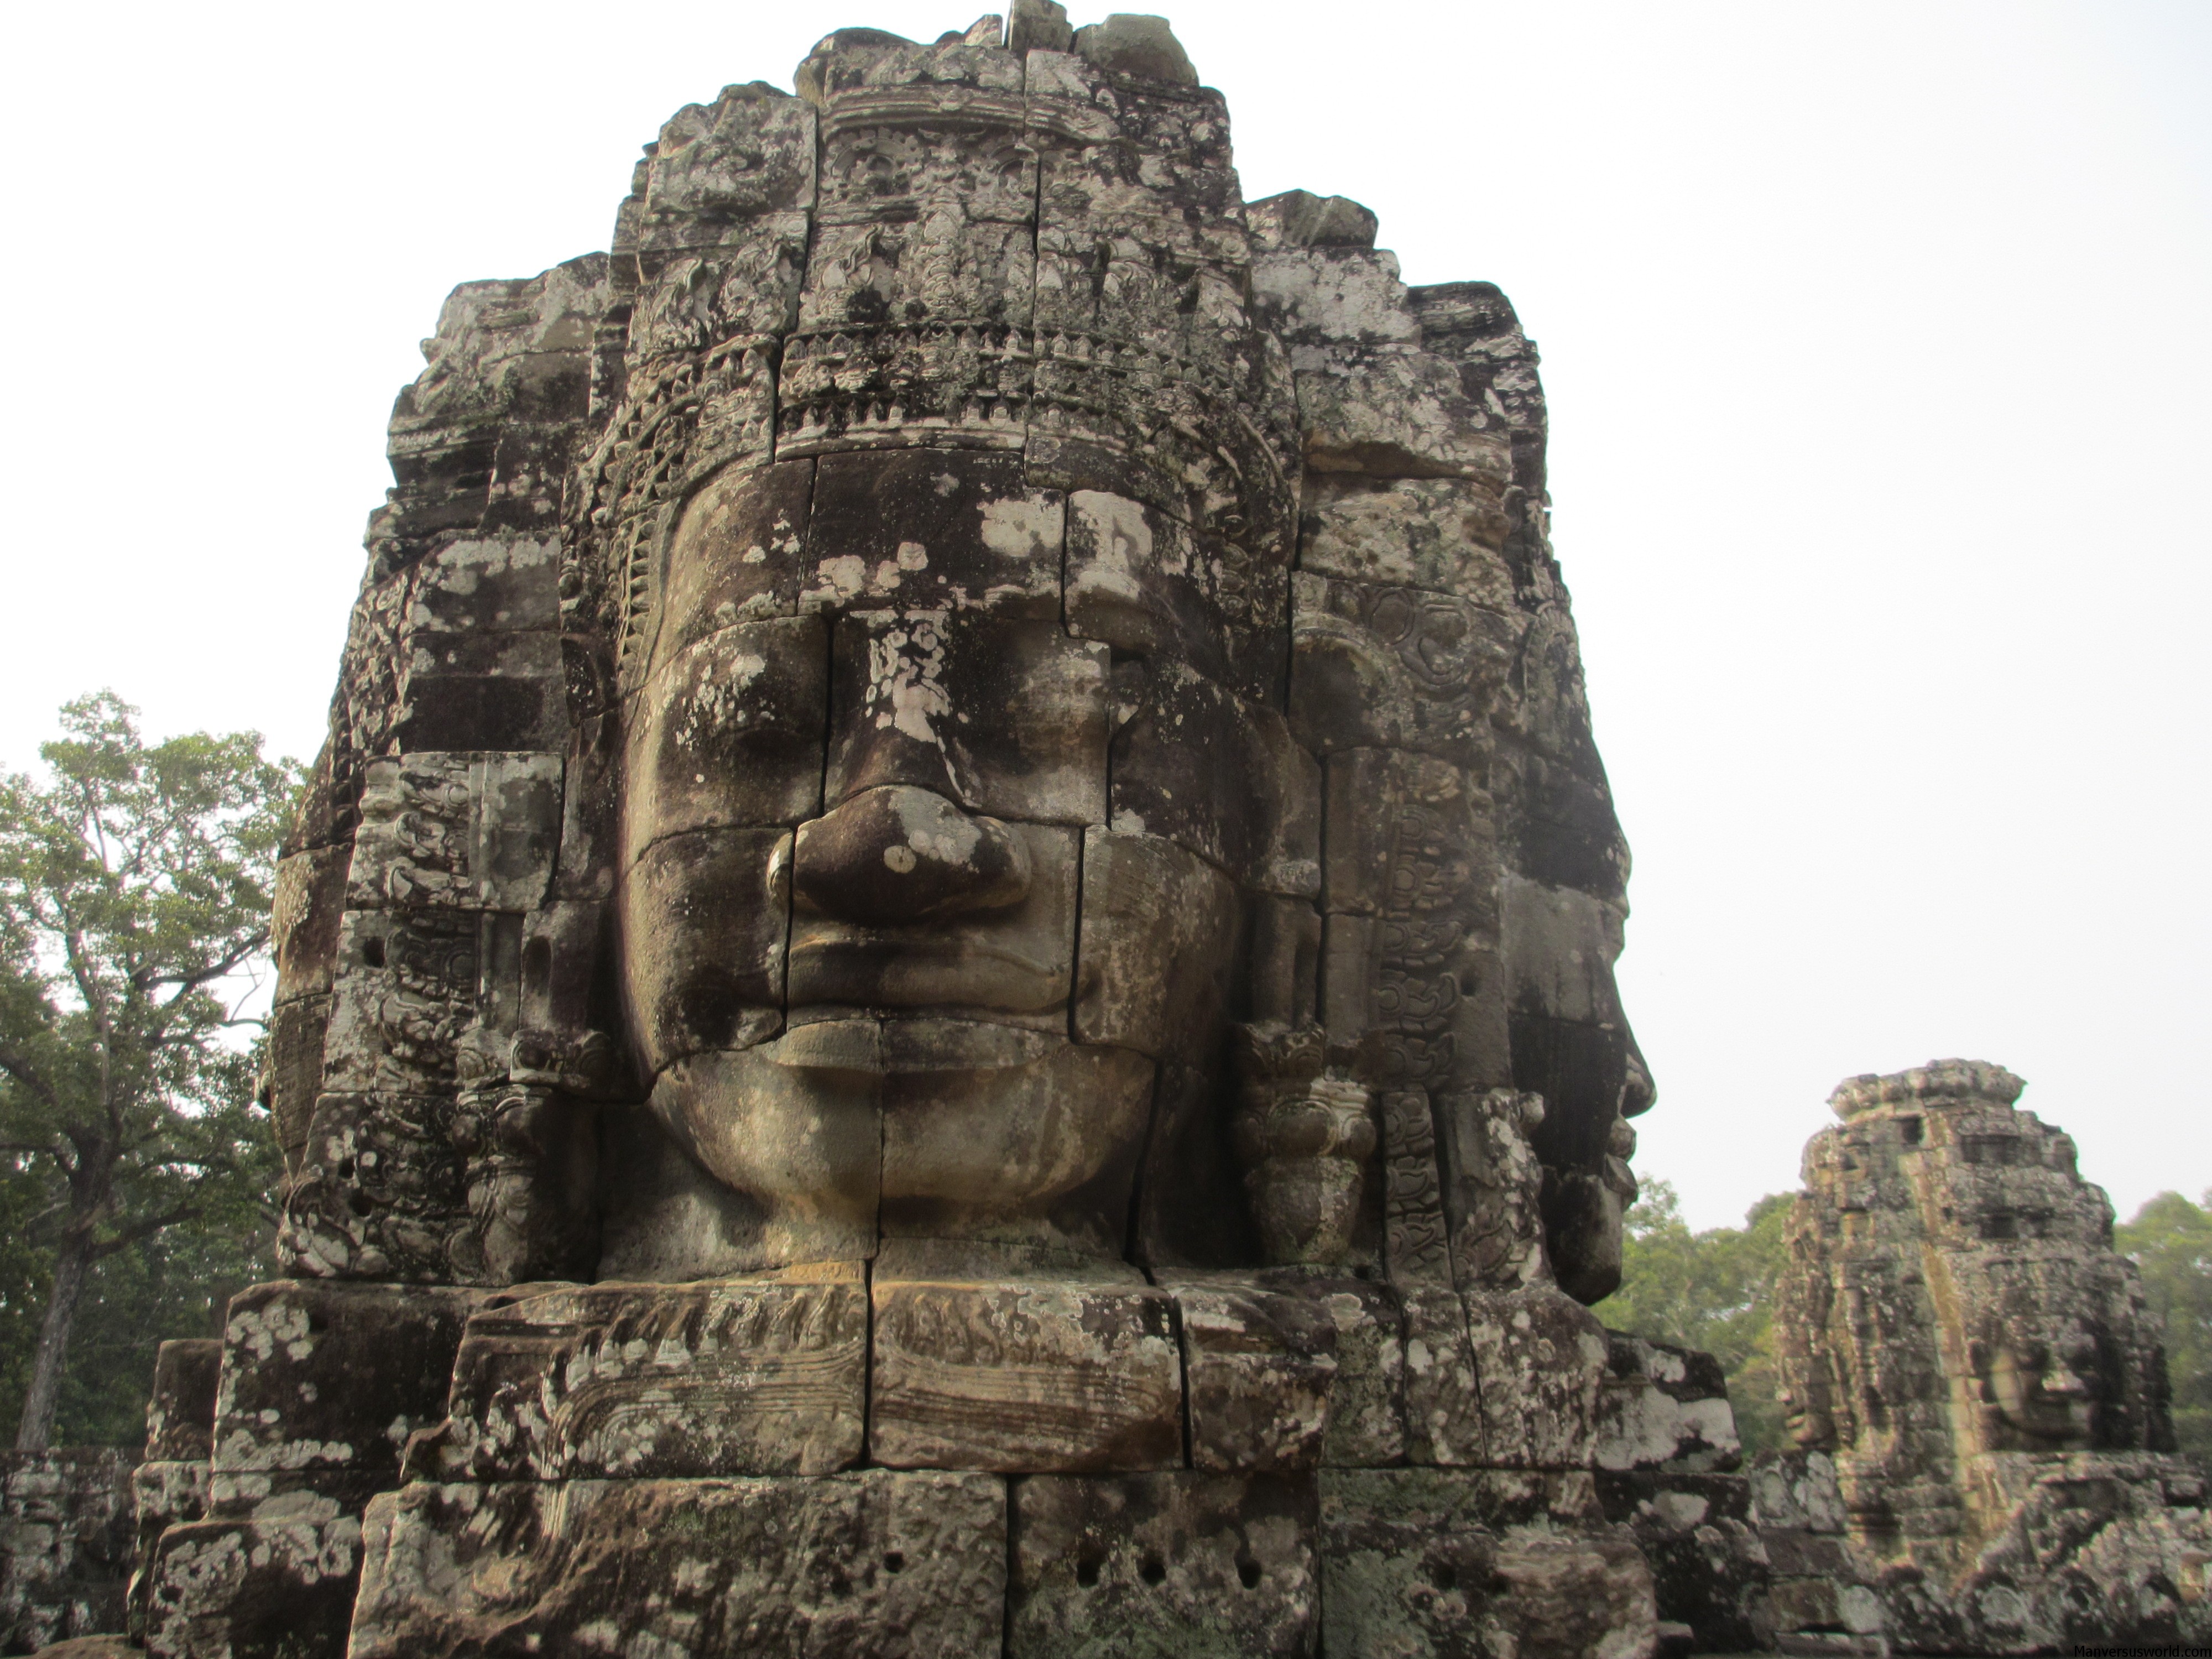 The amazing Bayon temple in Cambodia